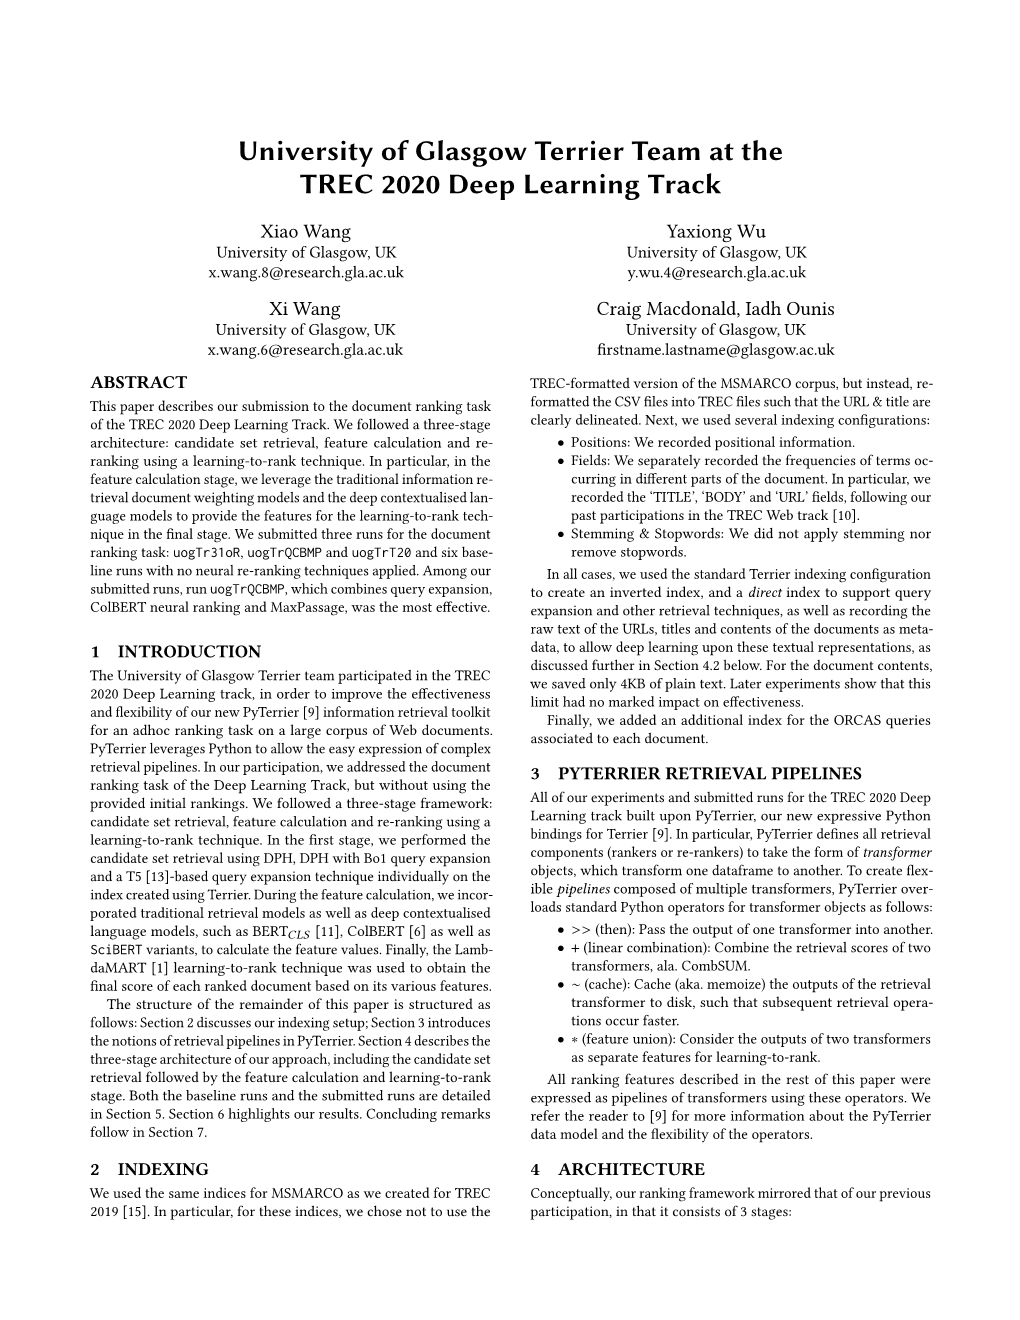 University of Glasgow Terrier Team at the TREC 2020 Deep Learning Track